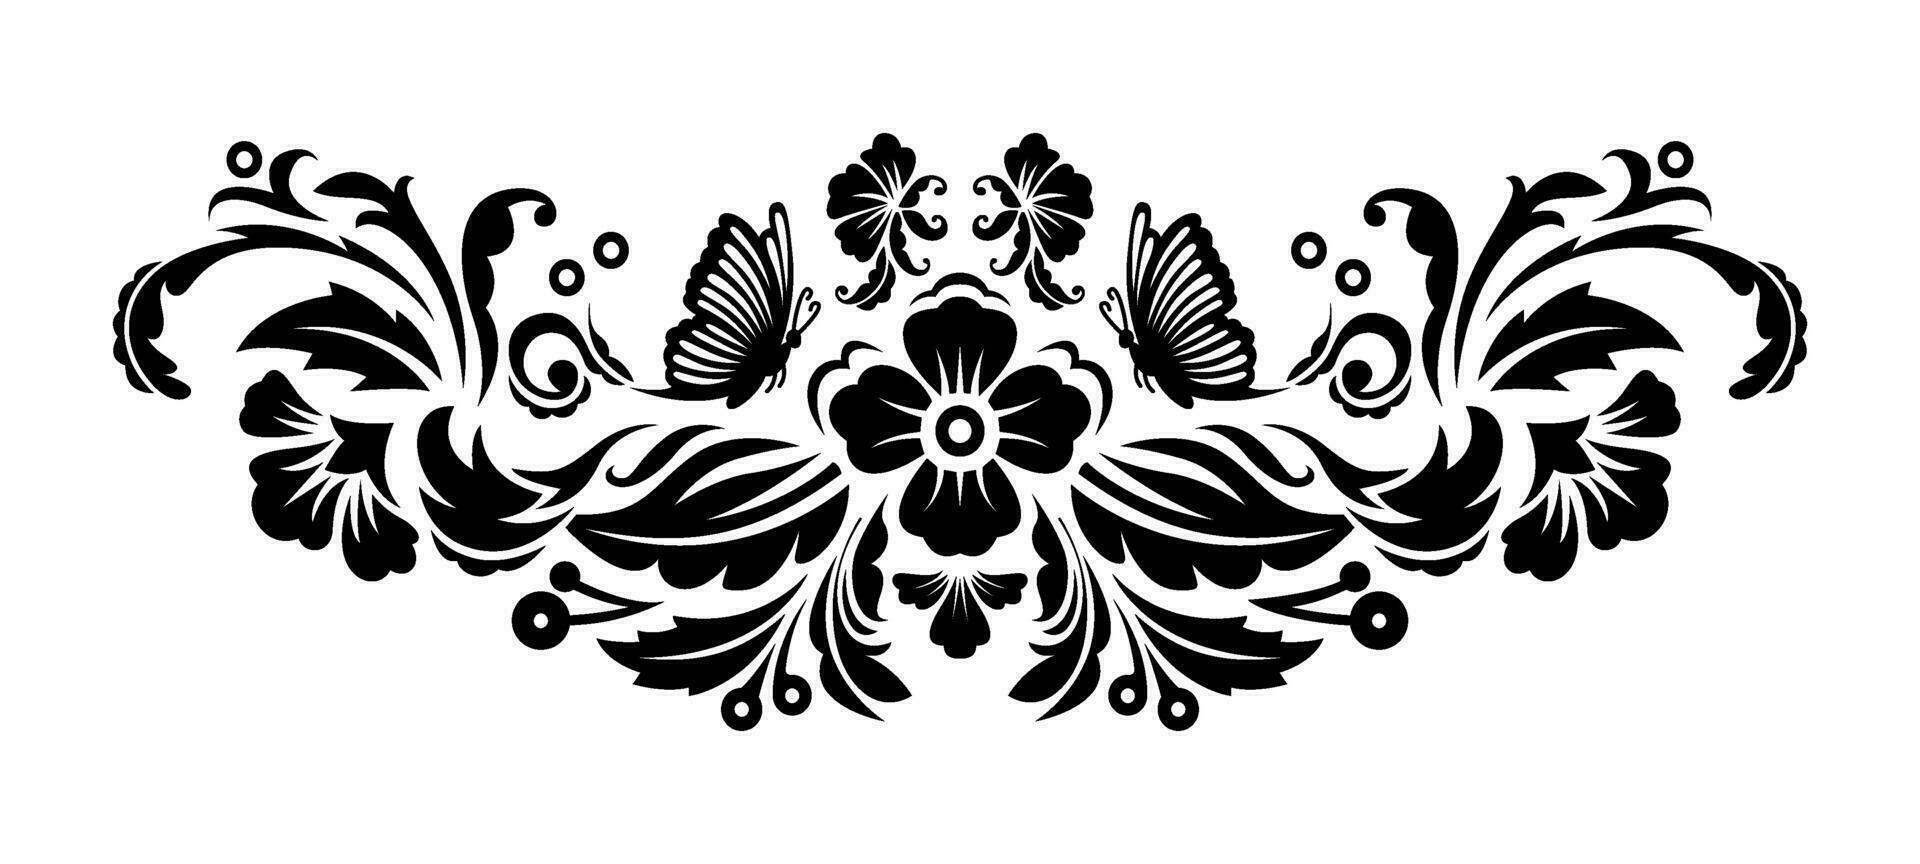 Vintage symmetrical floral ornament with butterfly and flowers isolated on white background. vector